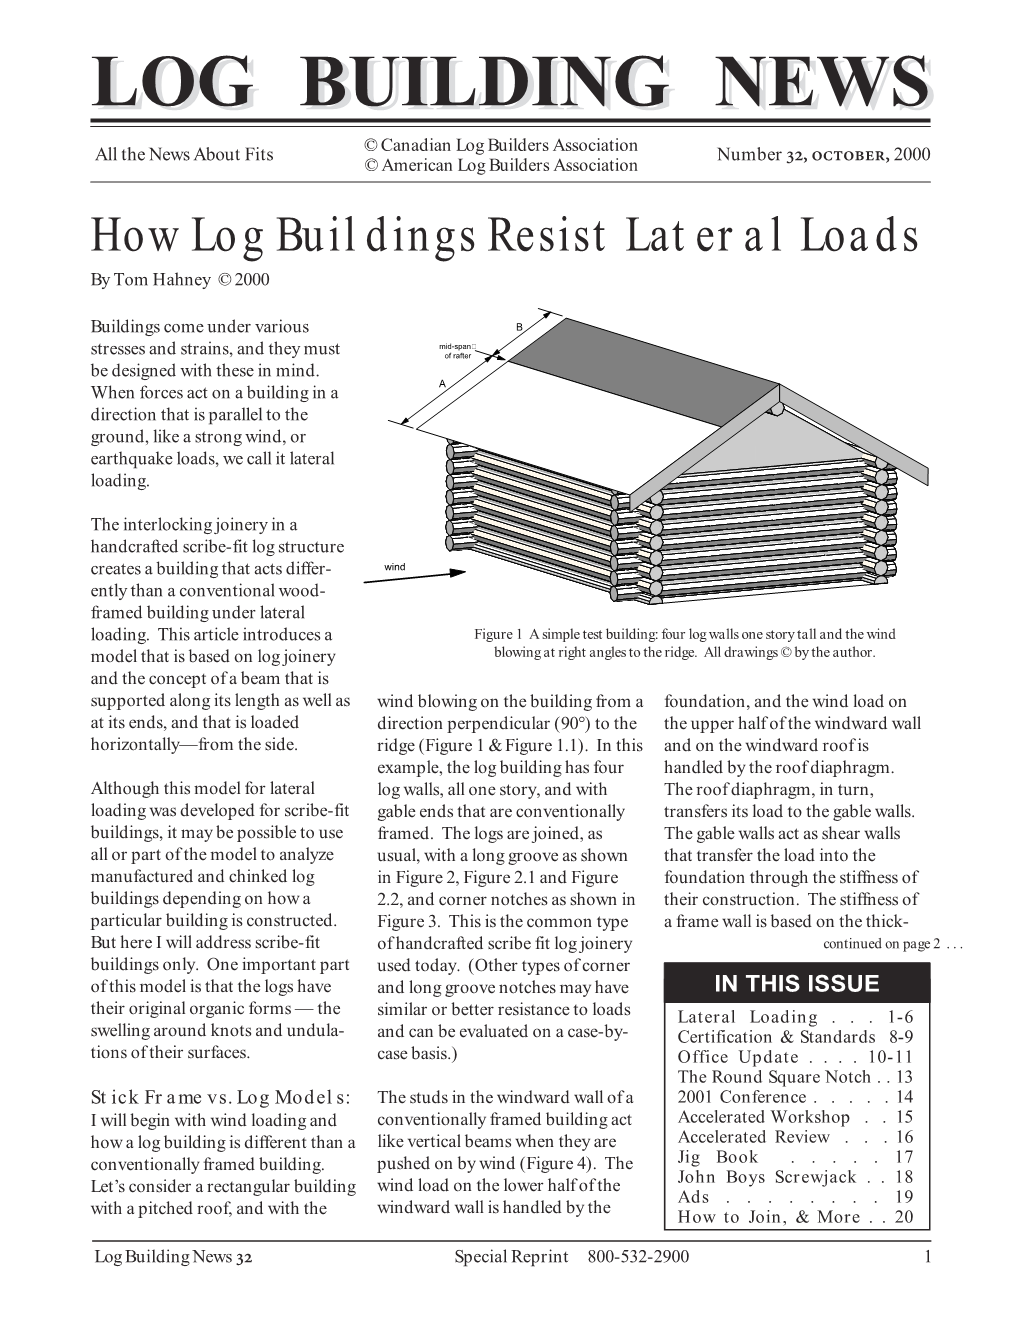 Lateral Loads on Log Walls